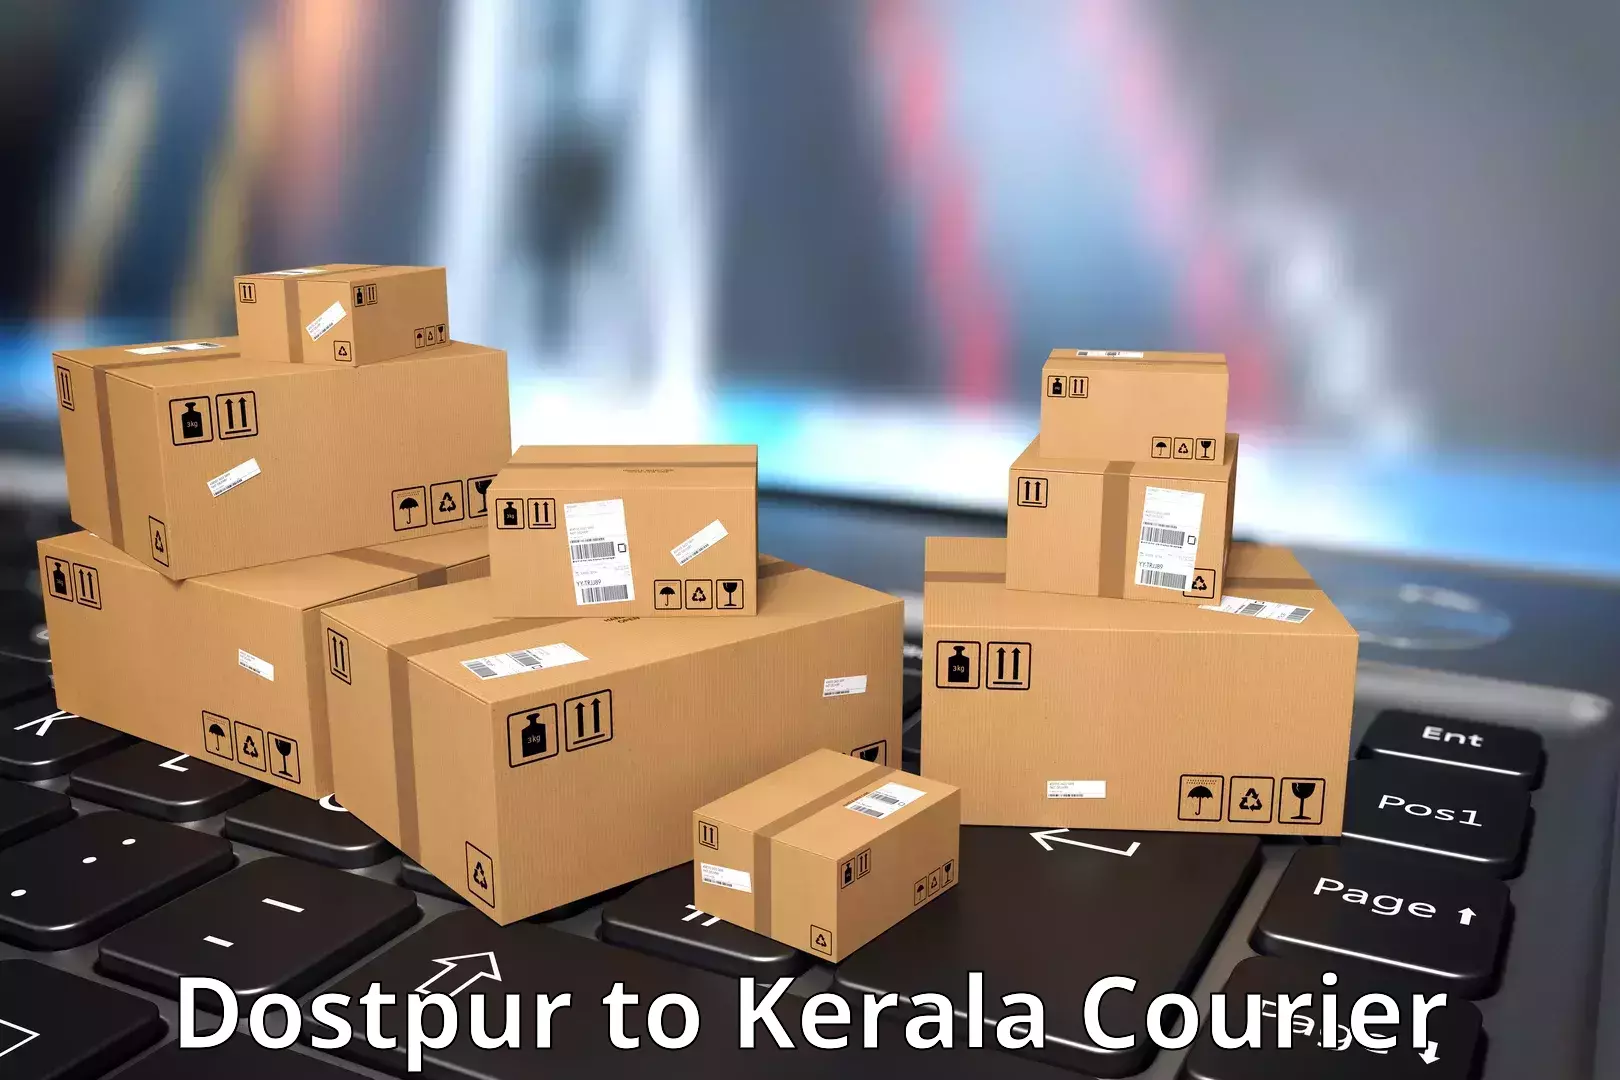 Speedy delivery service Dostpur to Kerala